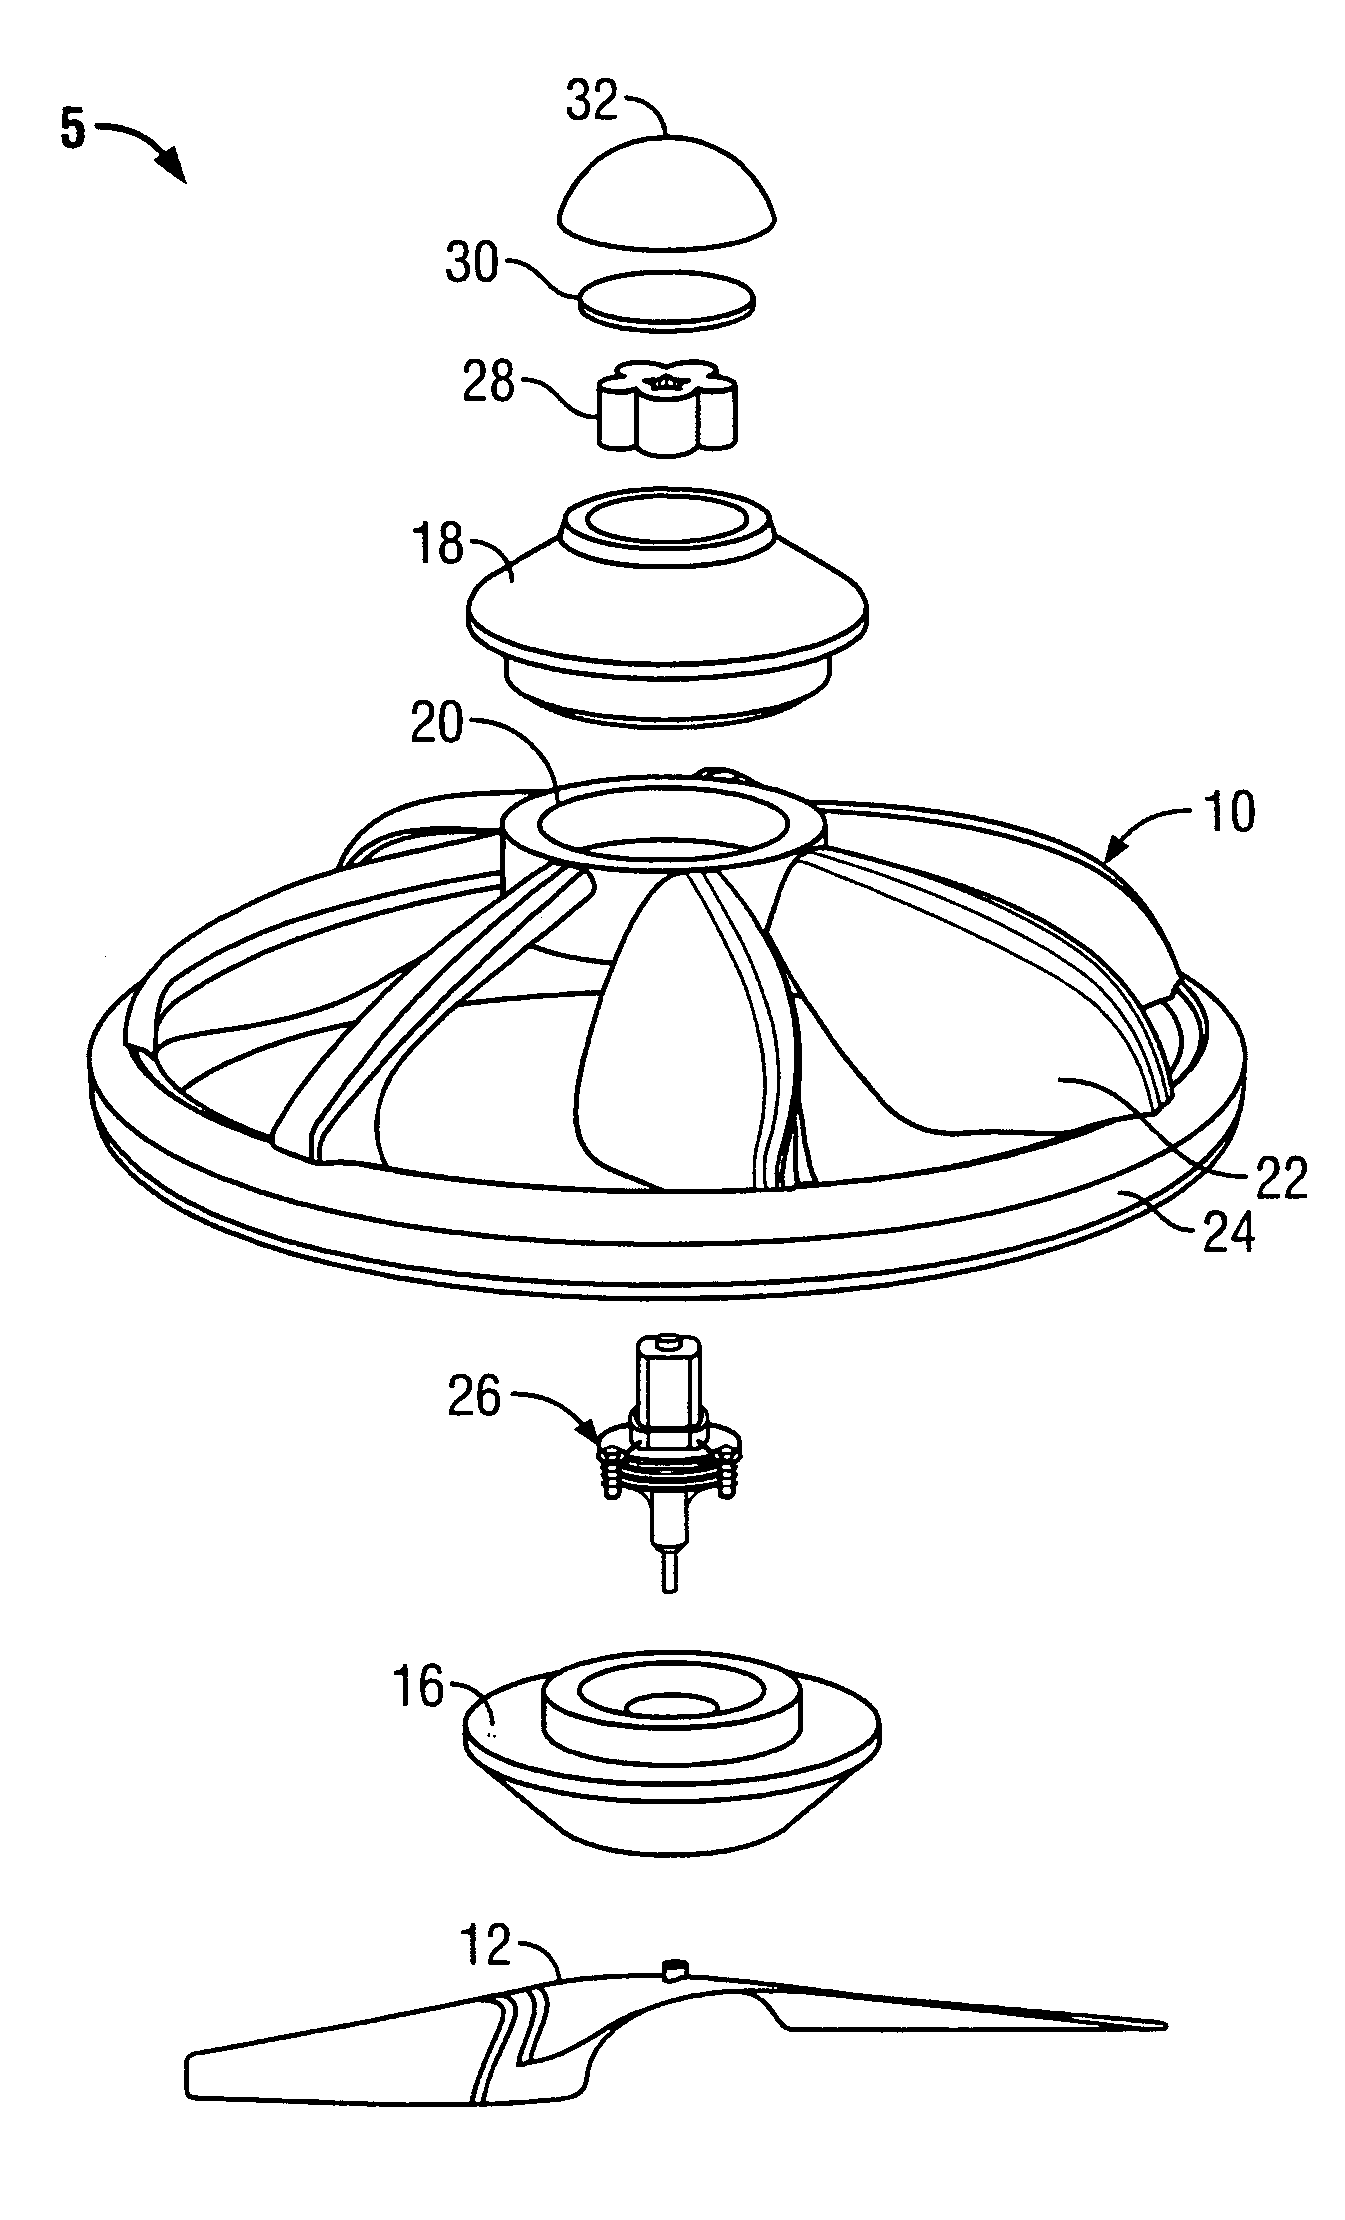 Self-stabilizing rotating toy